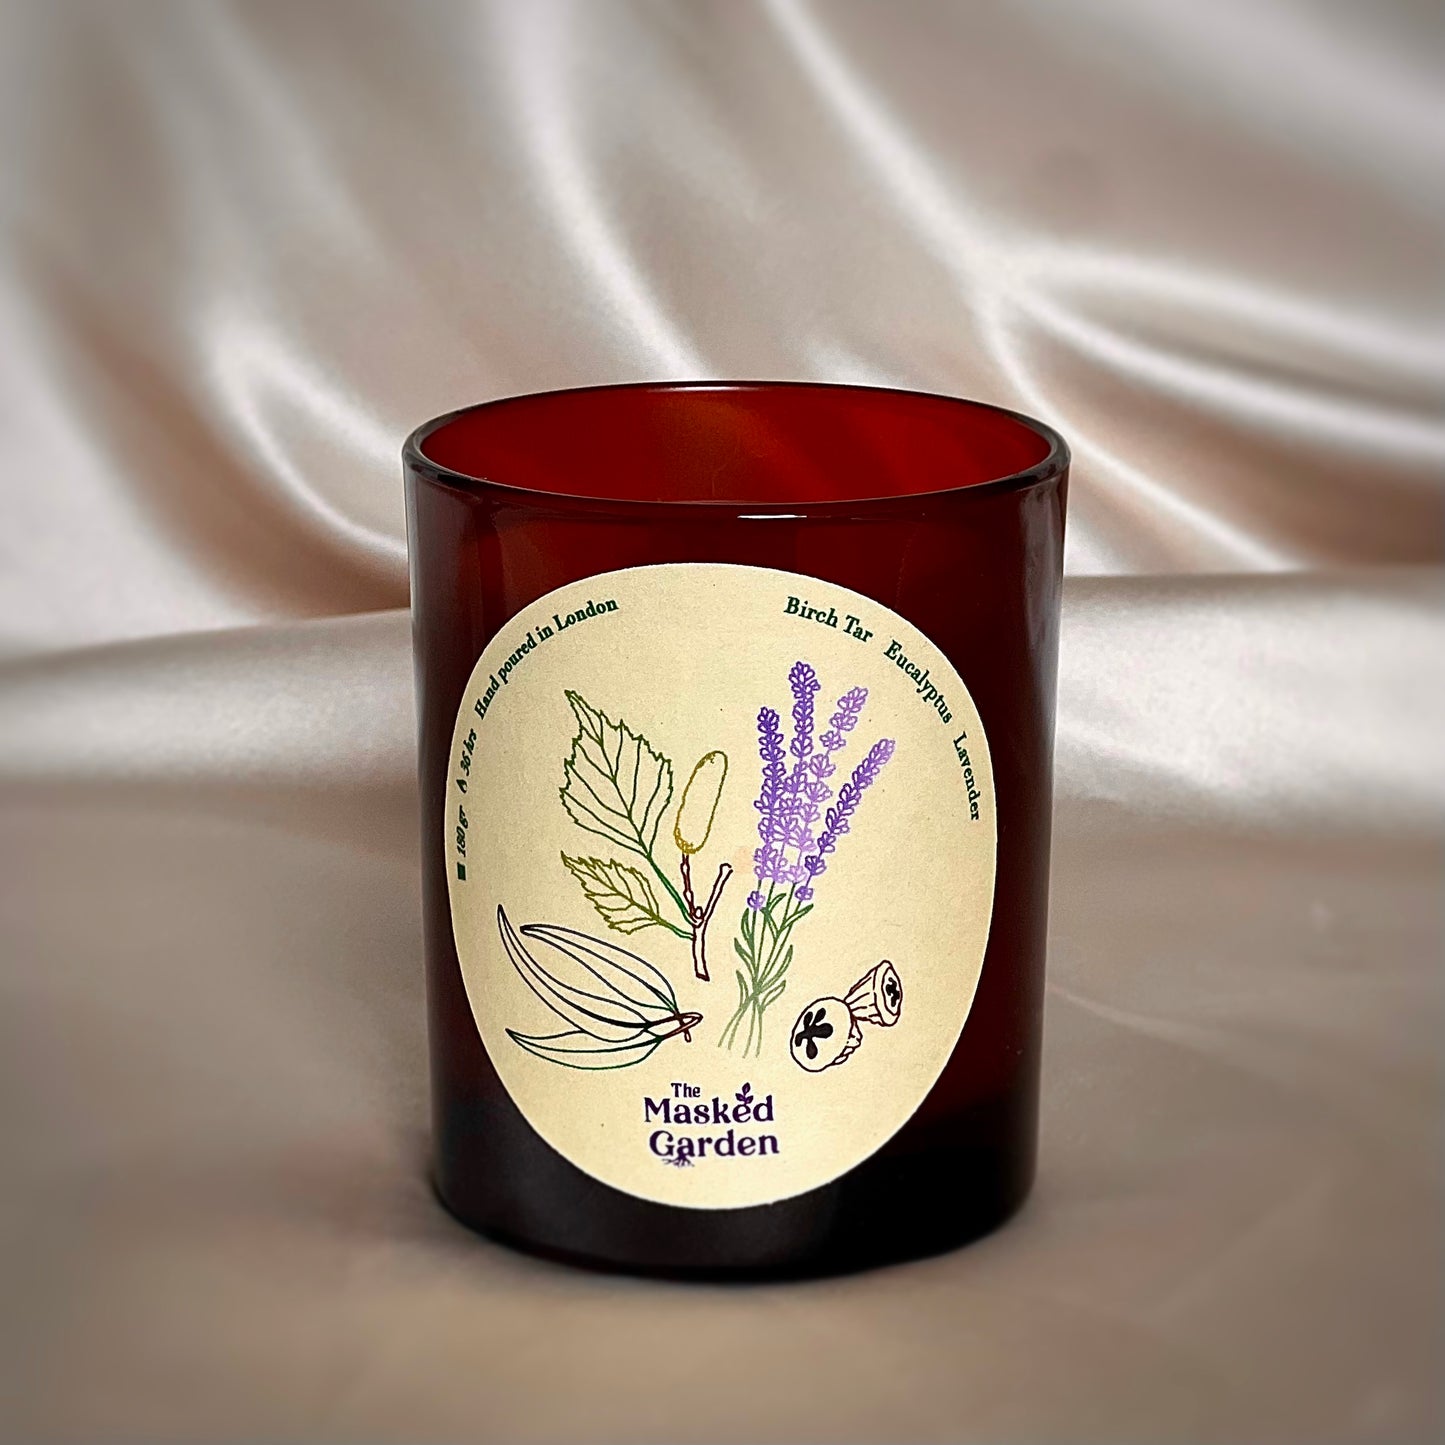 Birch Tar | Soy Wax Candle with essential oils